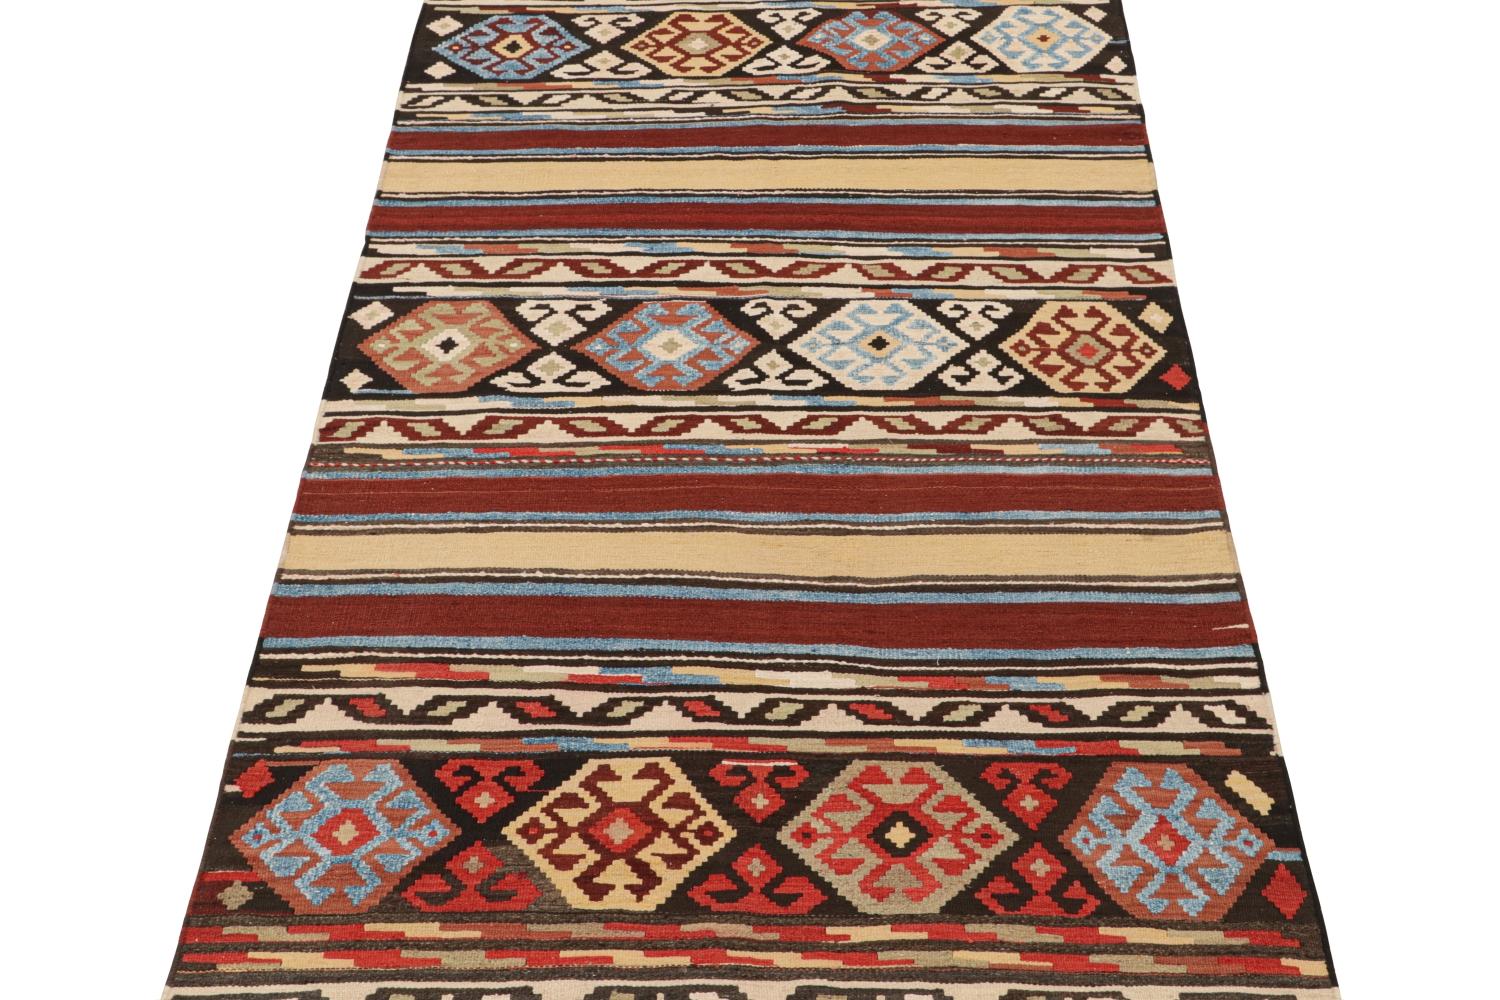 Vintage Shahsavan Persian Kilim in Stripes & Geometric Patterns In Good Condition For Sale In Long Island City, NY